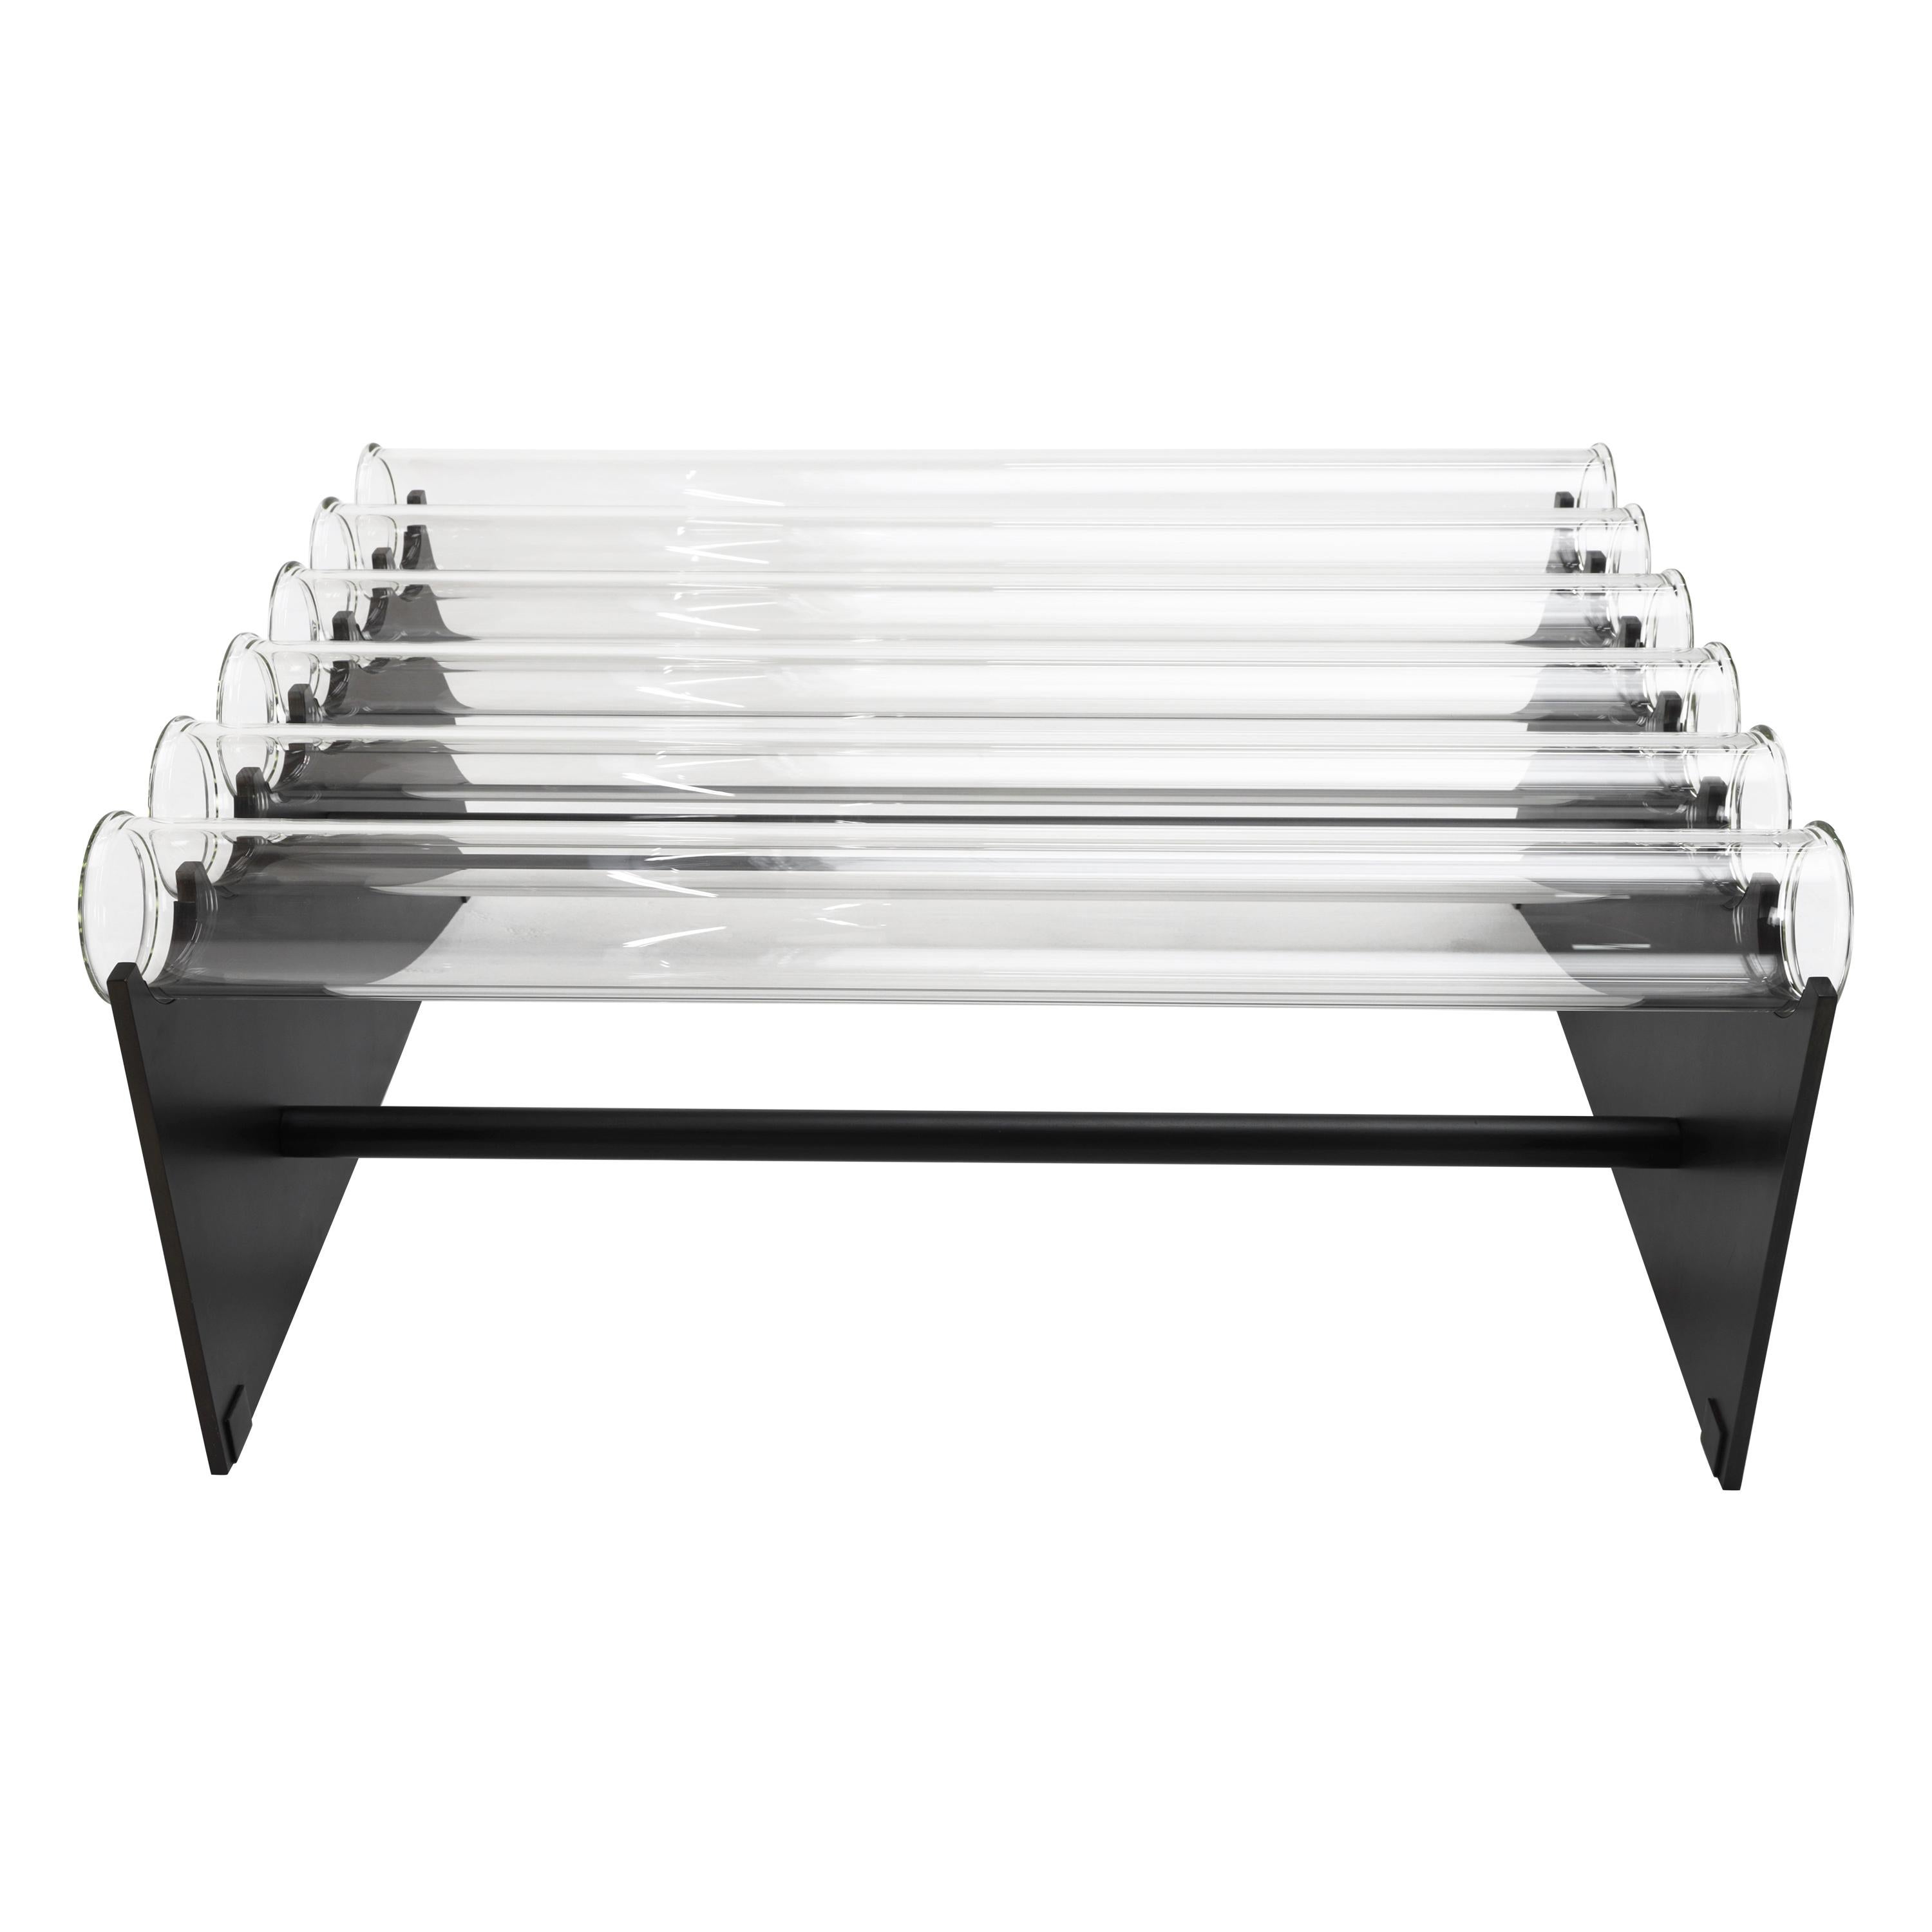 Museum Coffee Table in Steel and Glass, one-of-a-kind by CHRISTOPHER KREILING